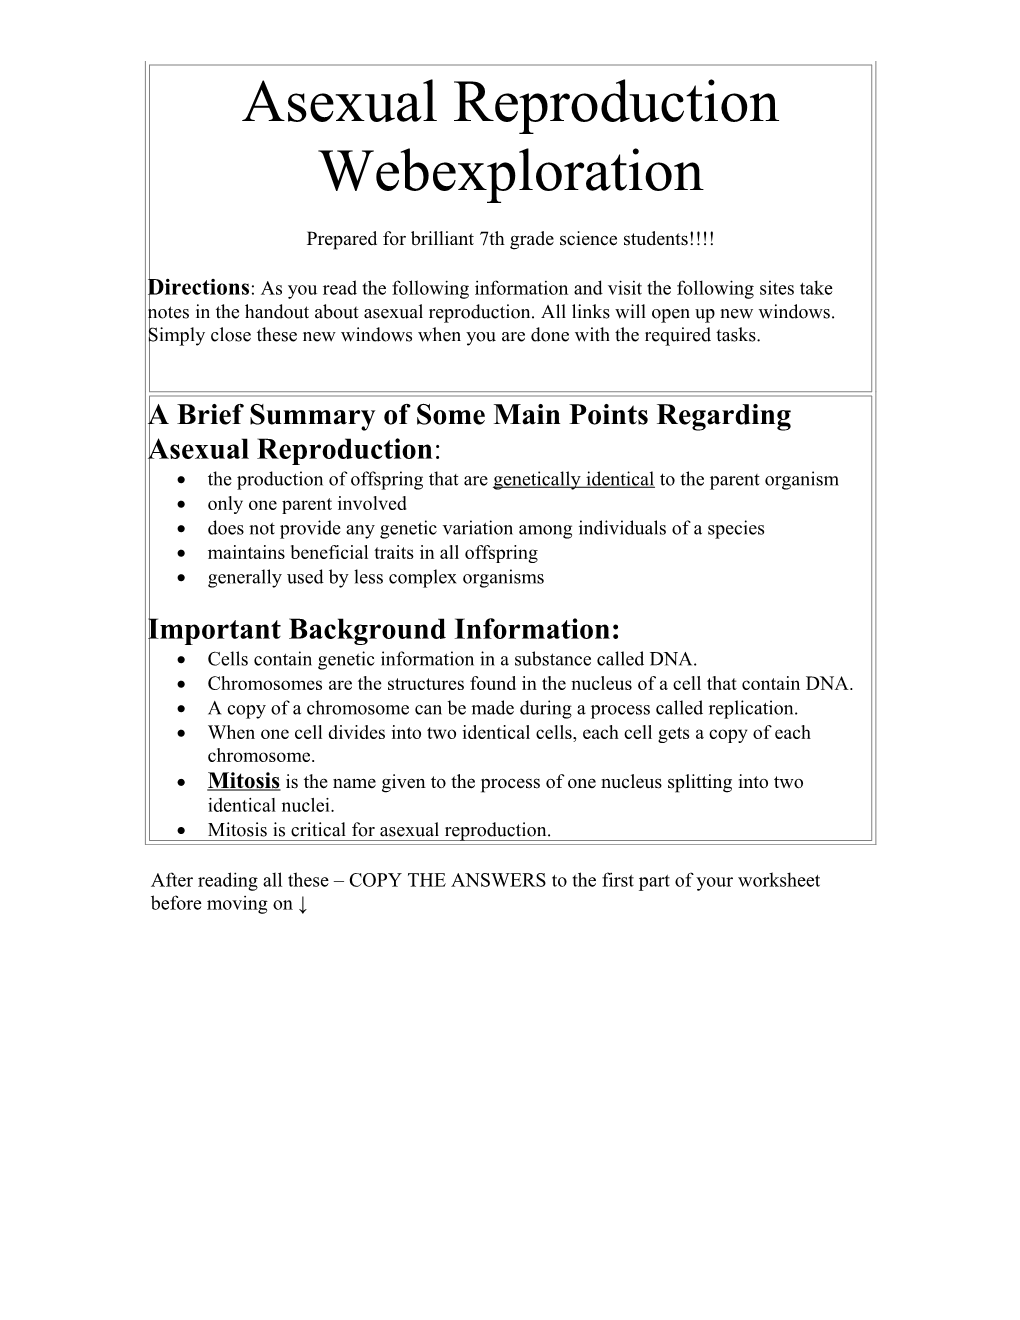 Asexual Reproduction Webquest